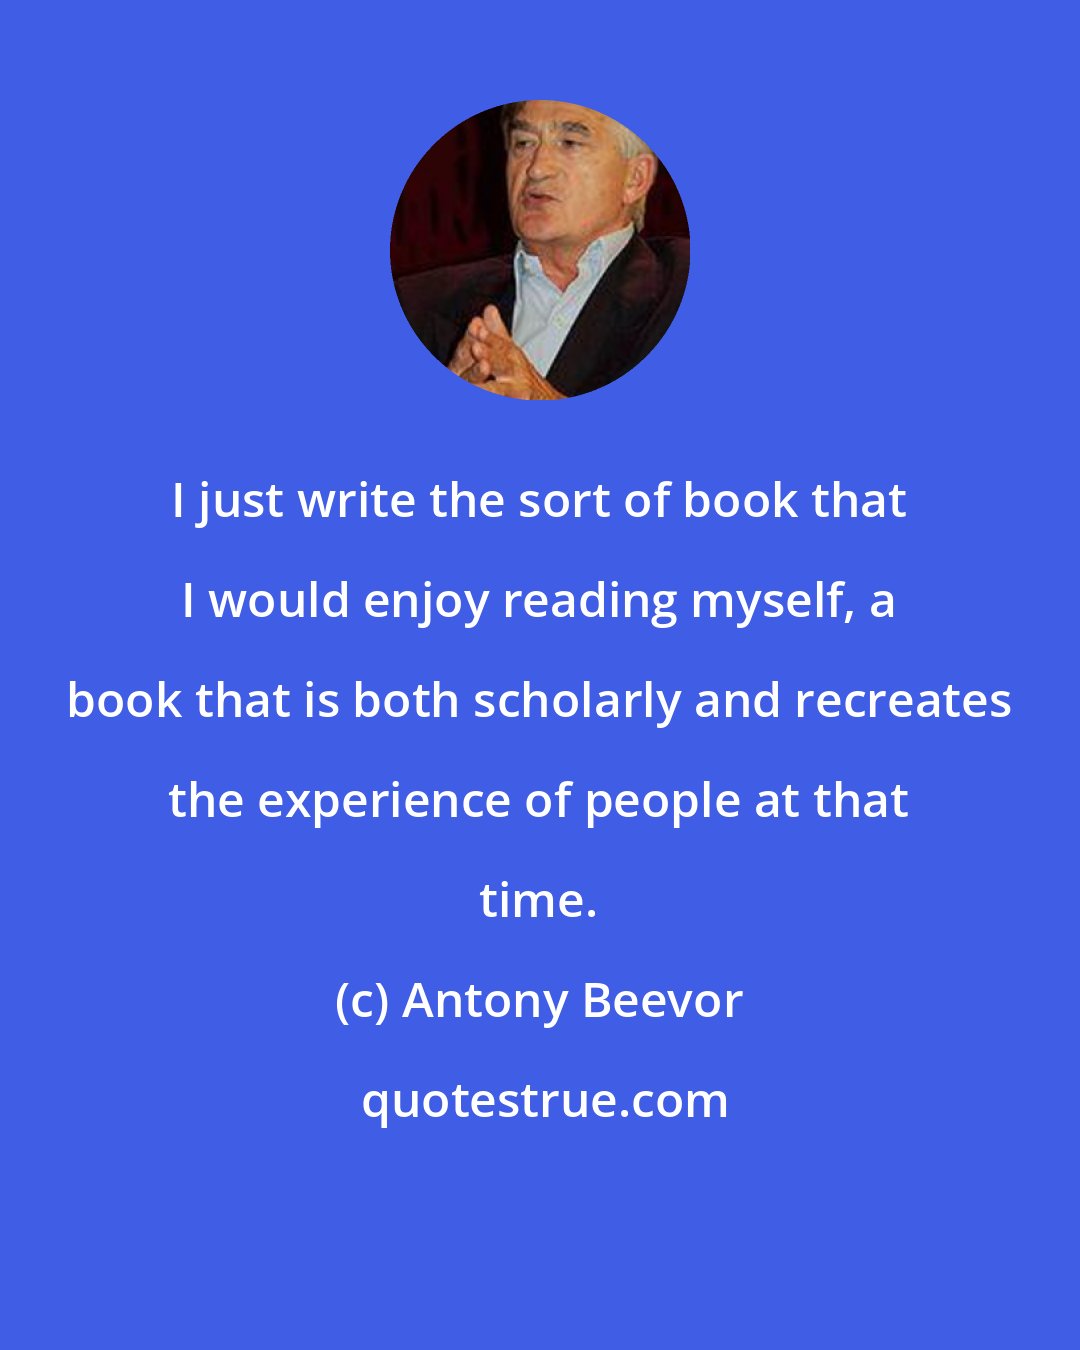 Antony Beevor: I just write the sort of book that I would enjoy reading myself, a book that is both scholarly and recreates the experience of people at that time.